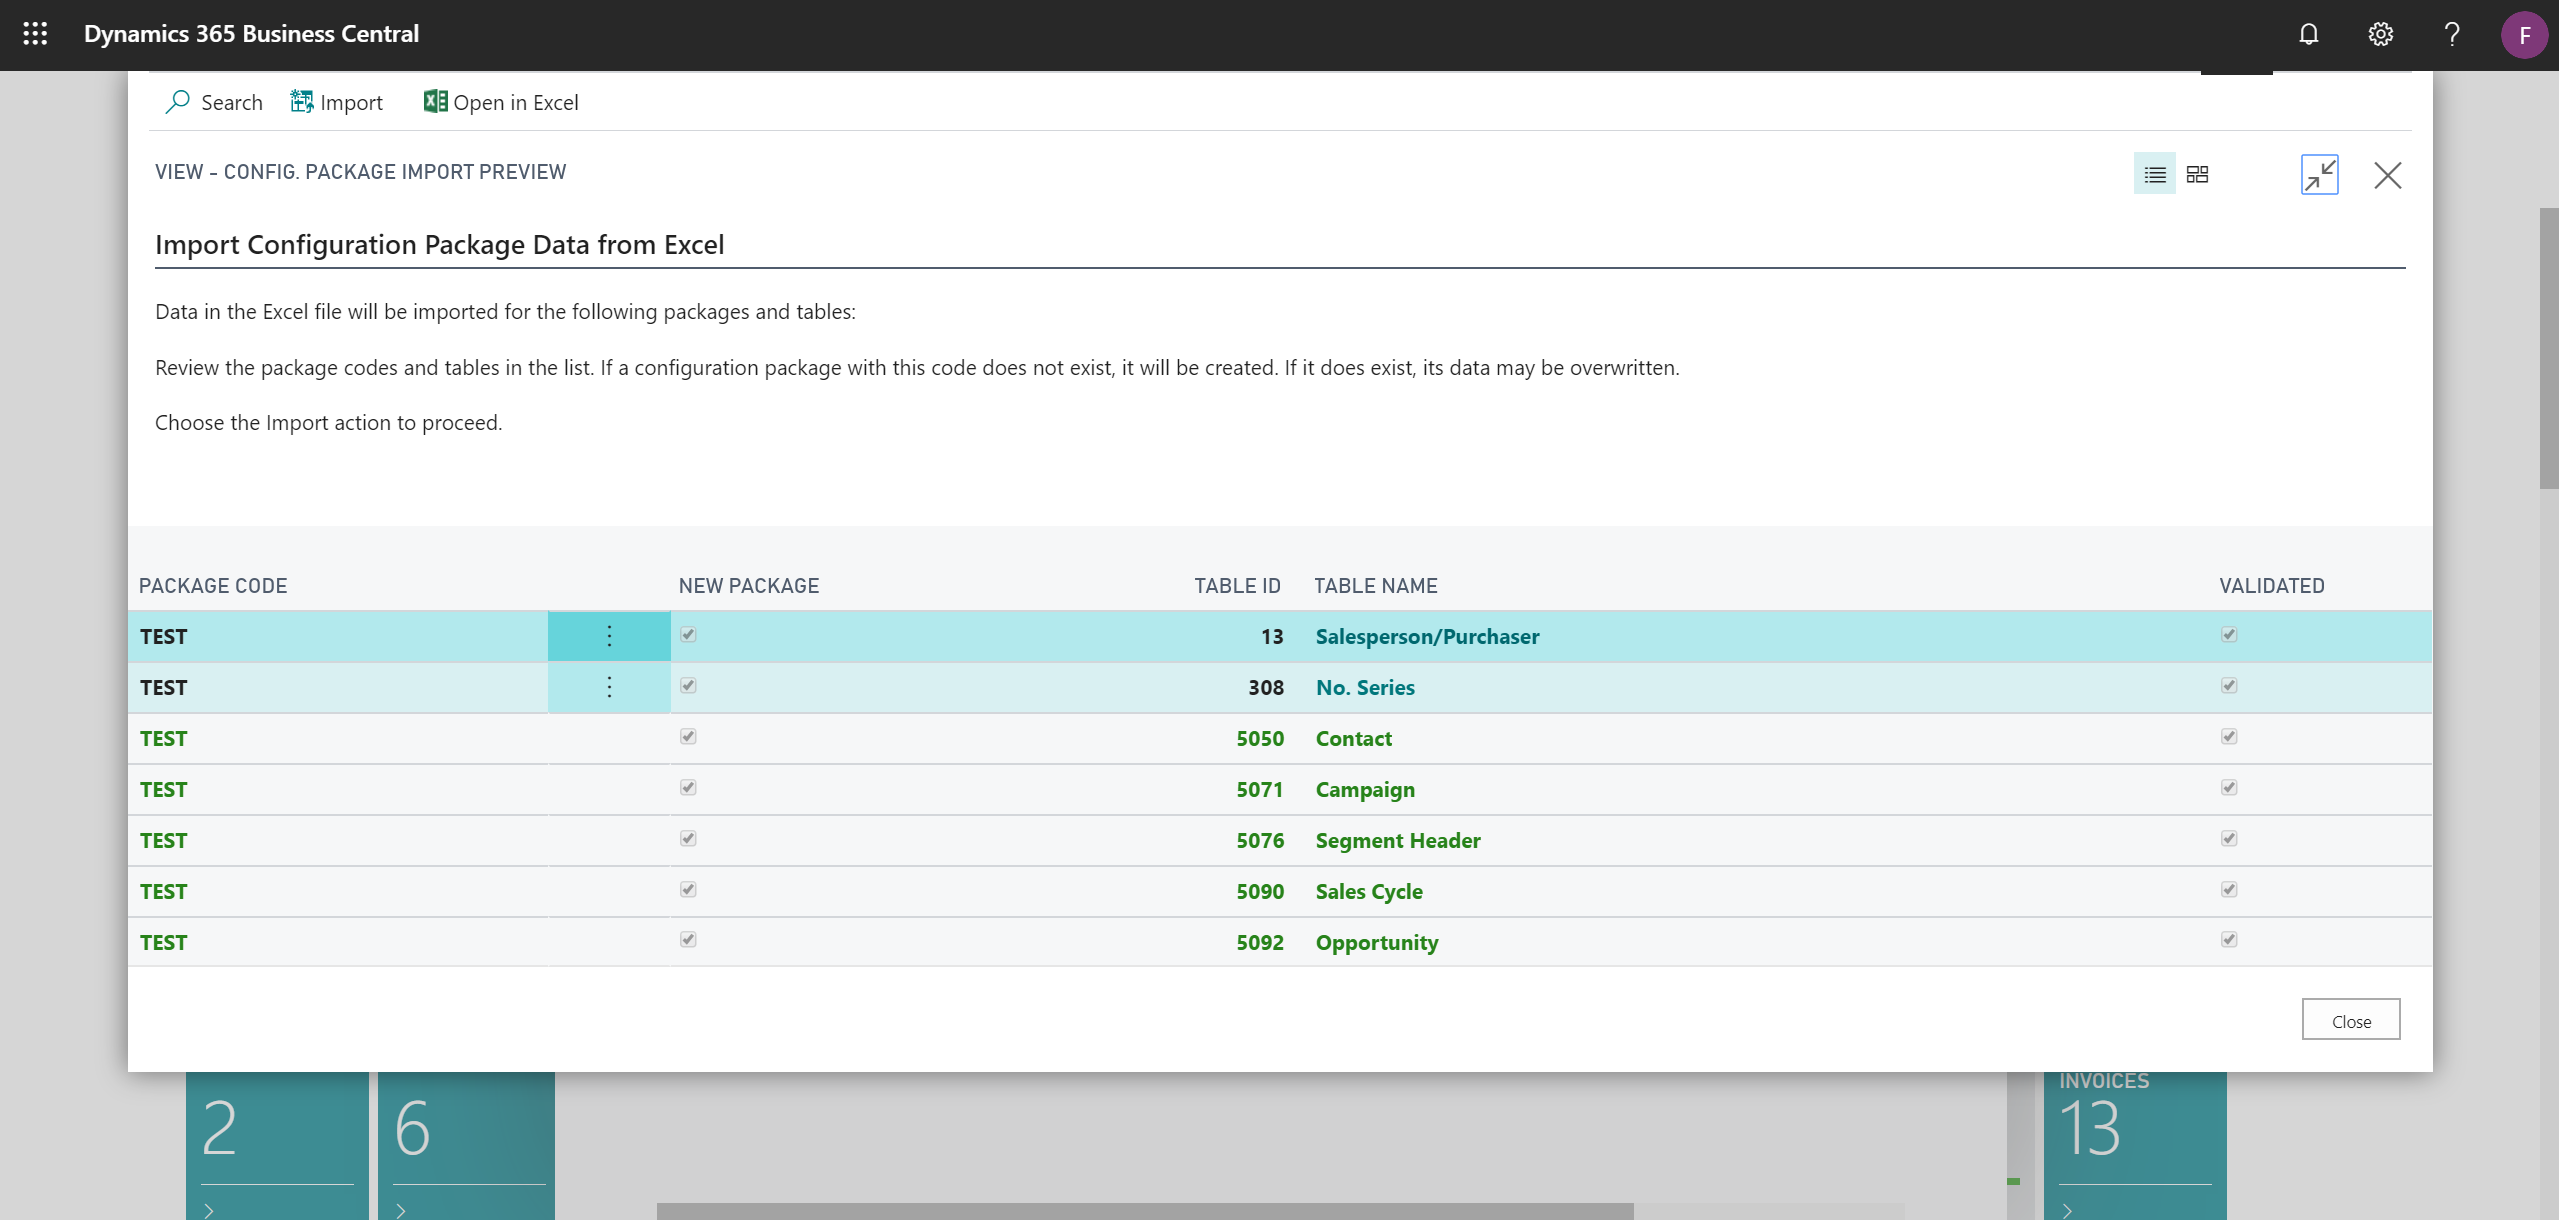 Showing Config. Package Import Review page